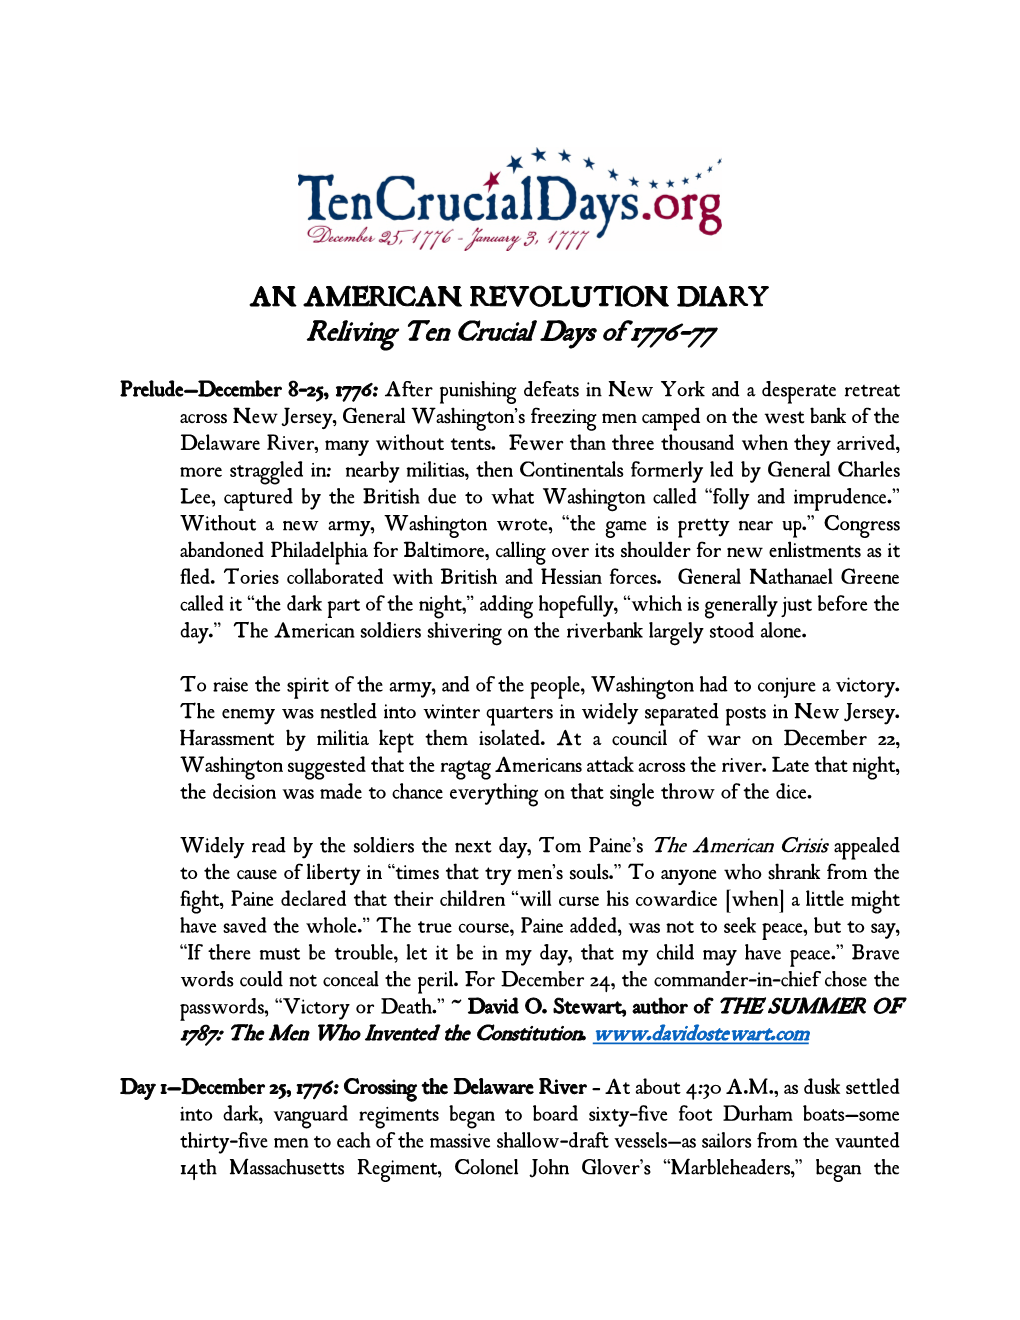 To Download the Ten Crucial Days: an American Diary, Click Here